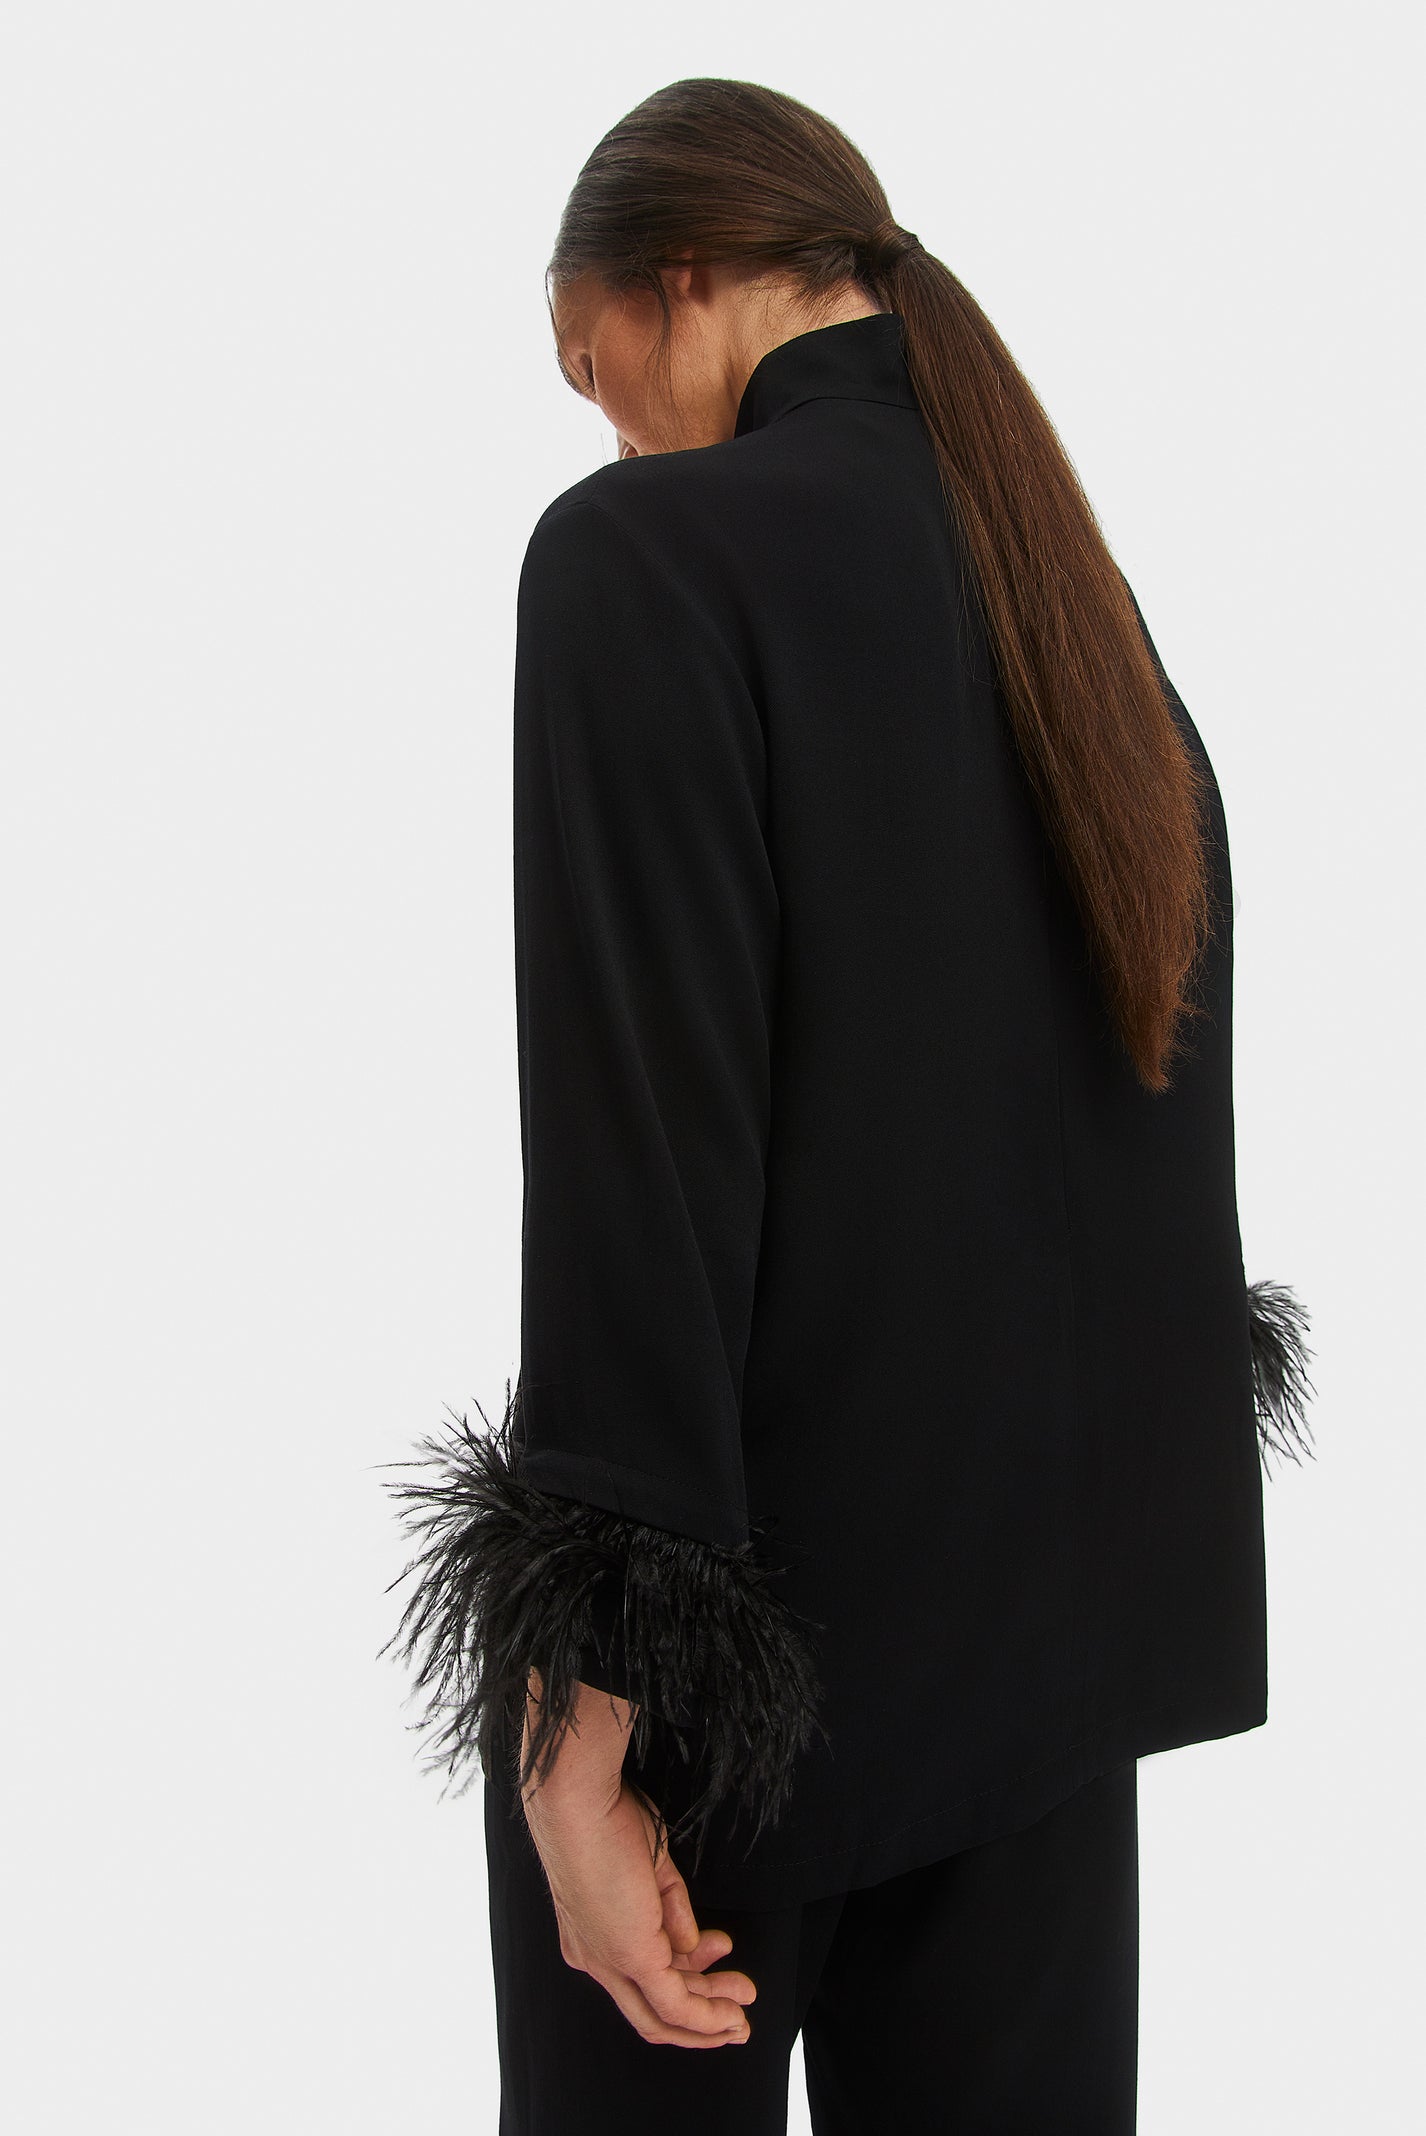 Daily Sleeper Black Tie Pajama with Detachable Feathers